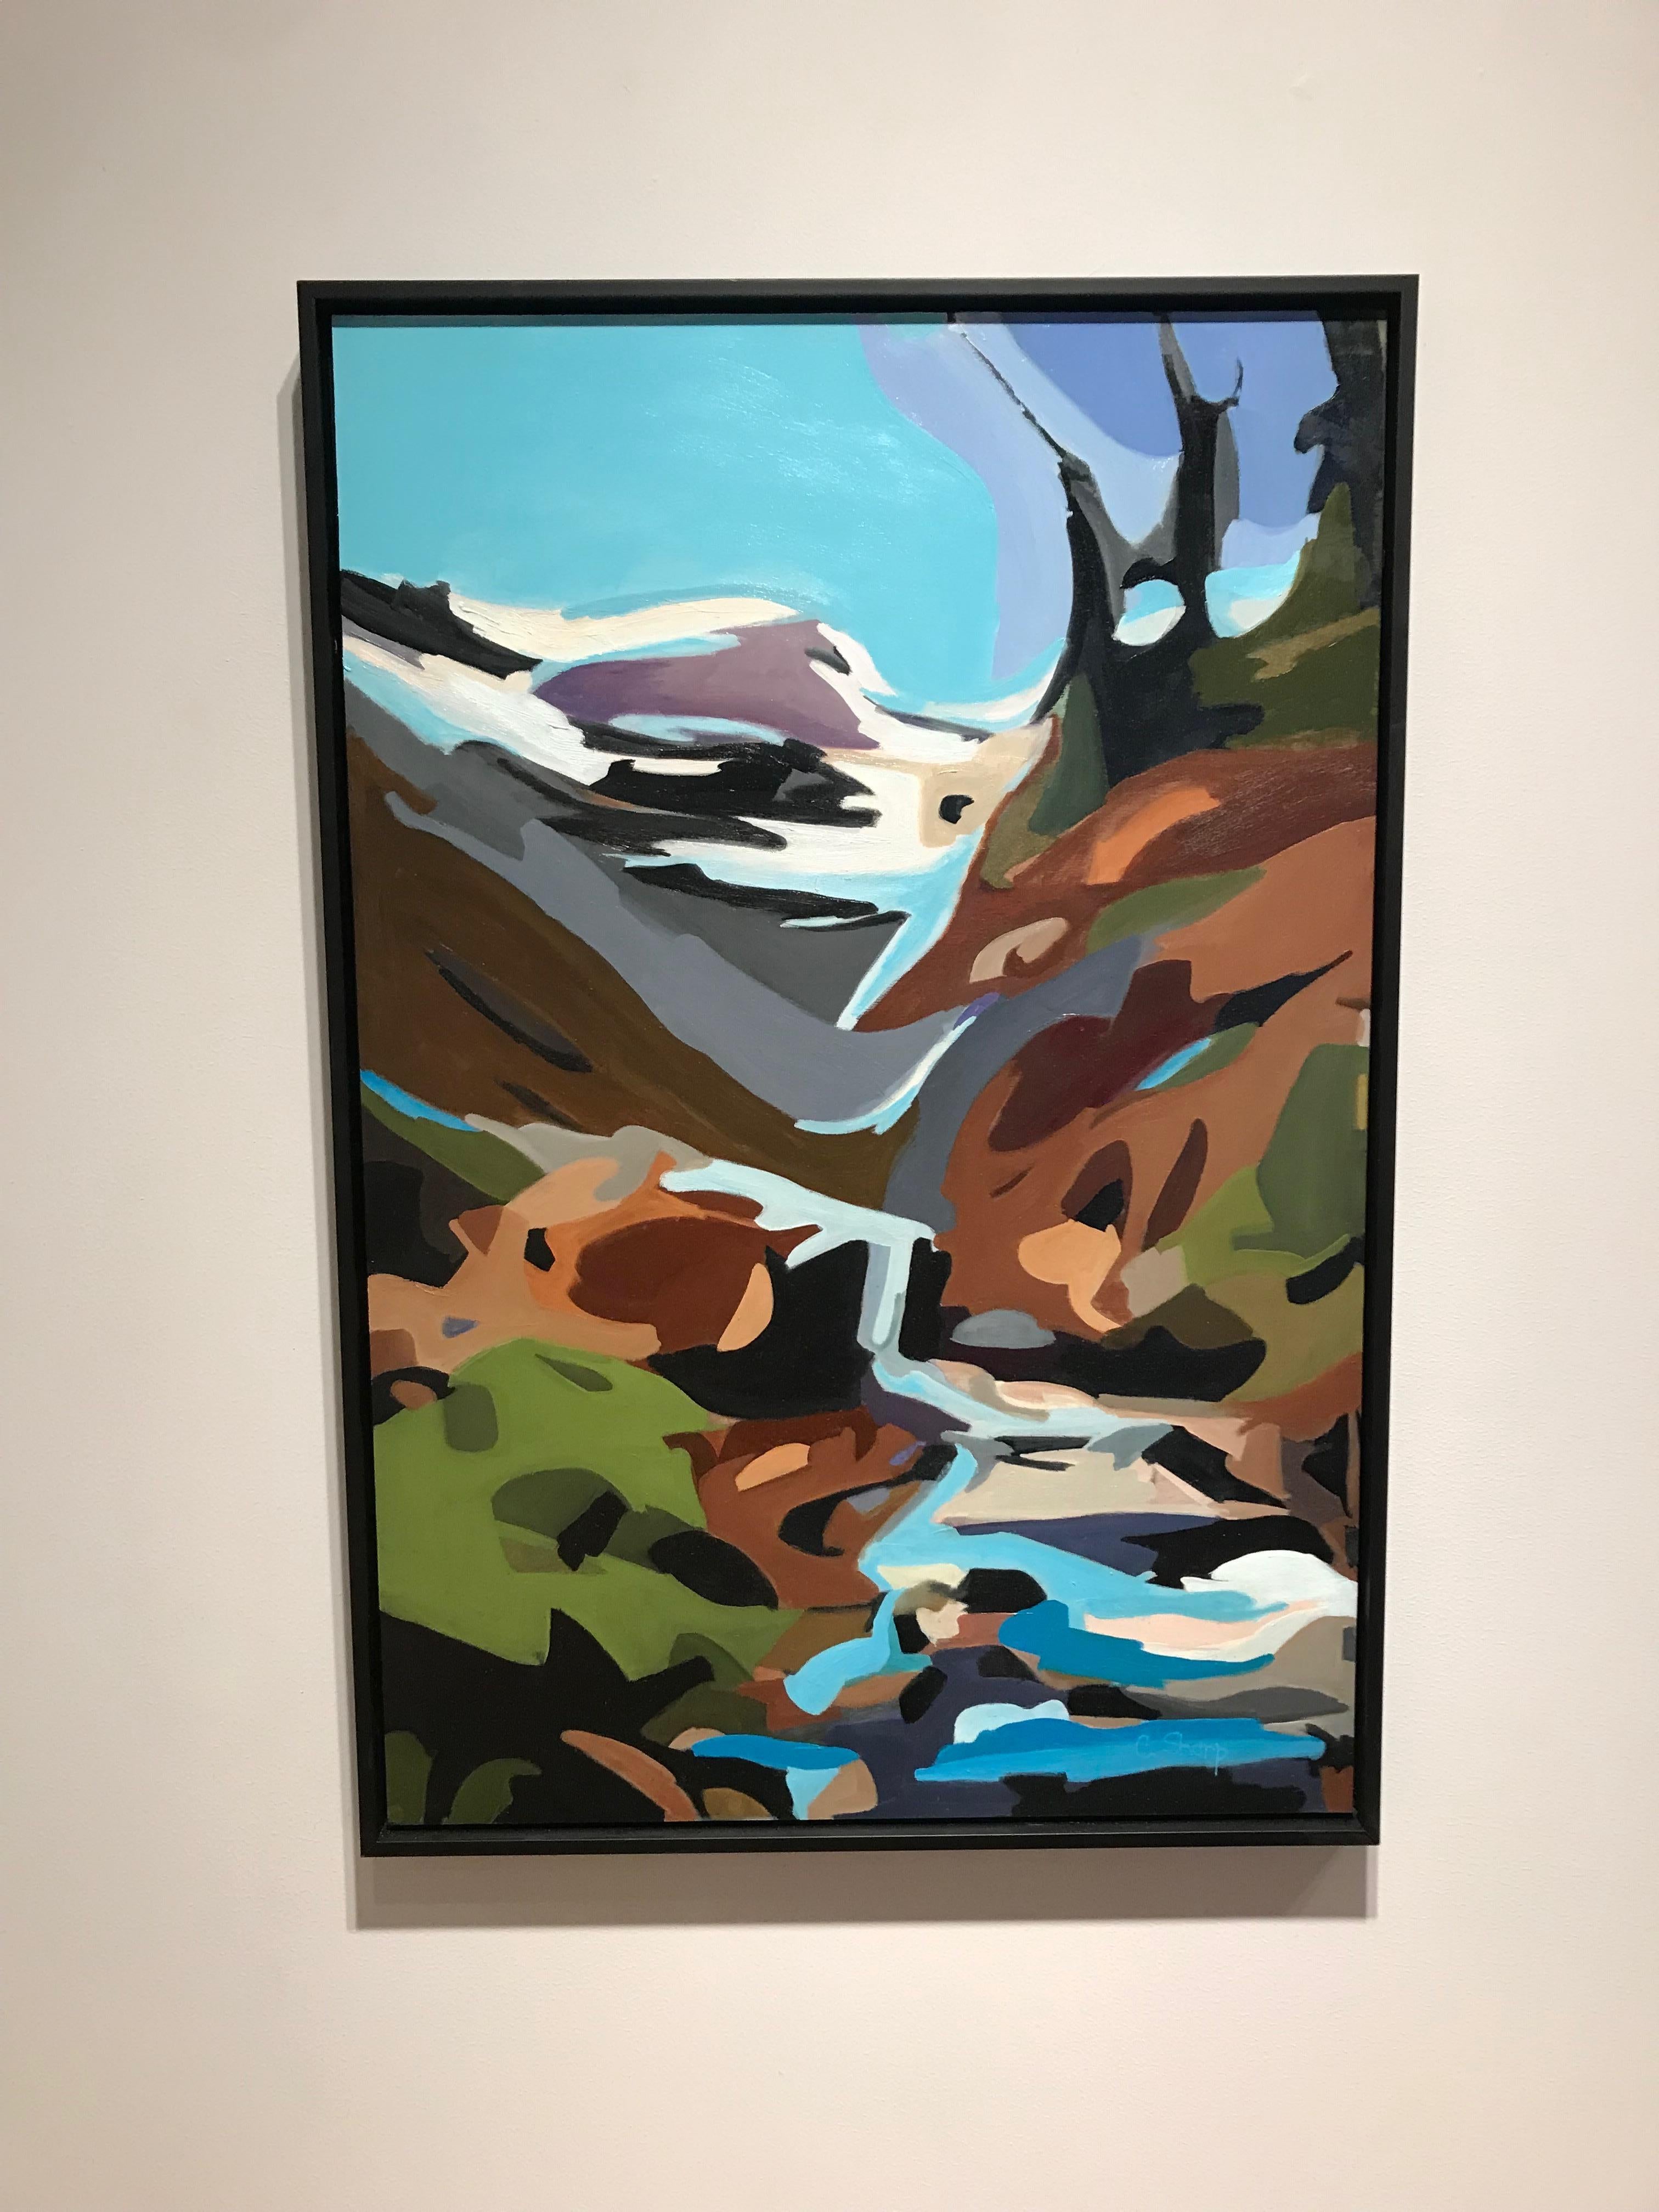 Christine Sharp is a Northwest painter whose work interprets the
landscape through the exploration of pattern, abstraction, and shape. Sharp reenvisions and effectively parses the natural world, translating scenes into
vibrant swaths of color and